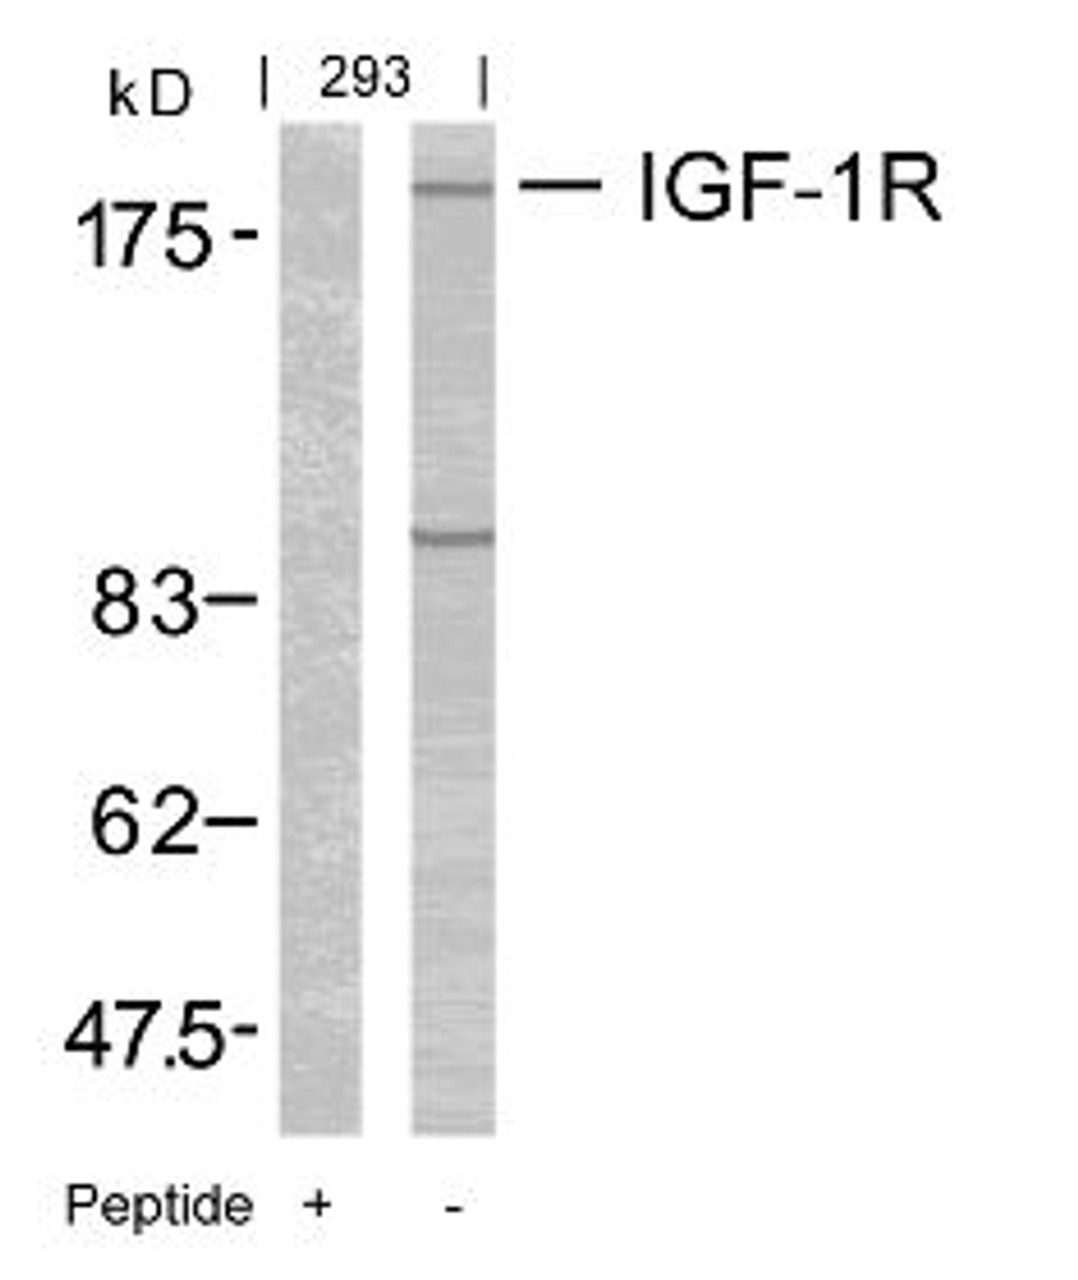 Western blot analysis of lysed extracts from 293 cells using IGF-1R (Ab-1165/1166) .